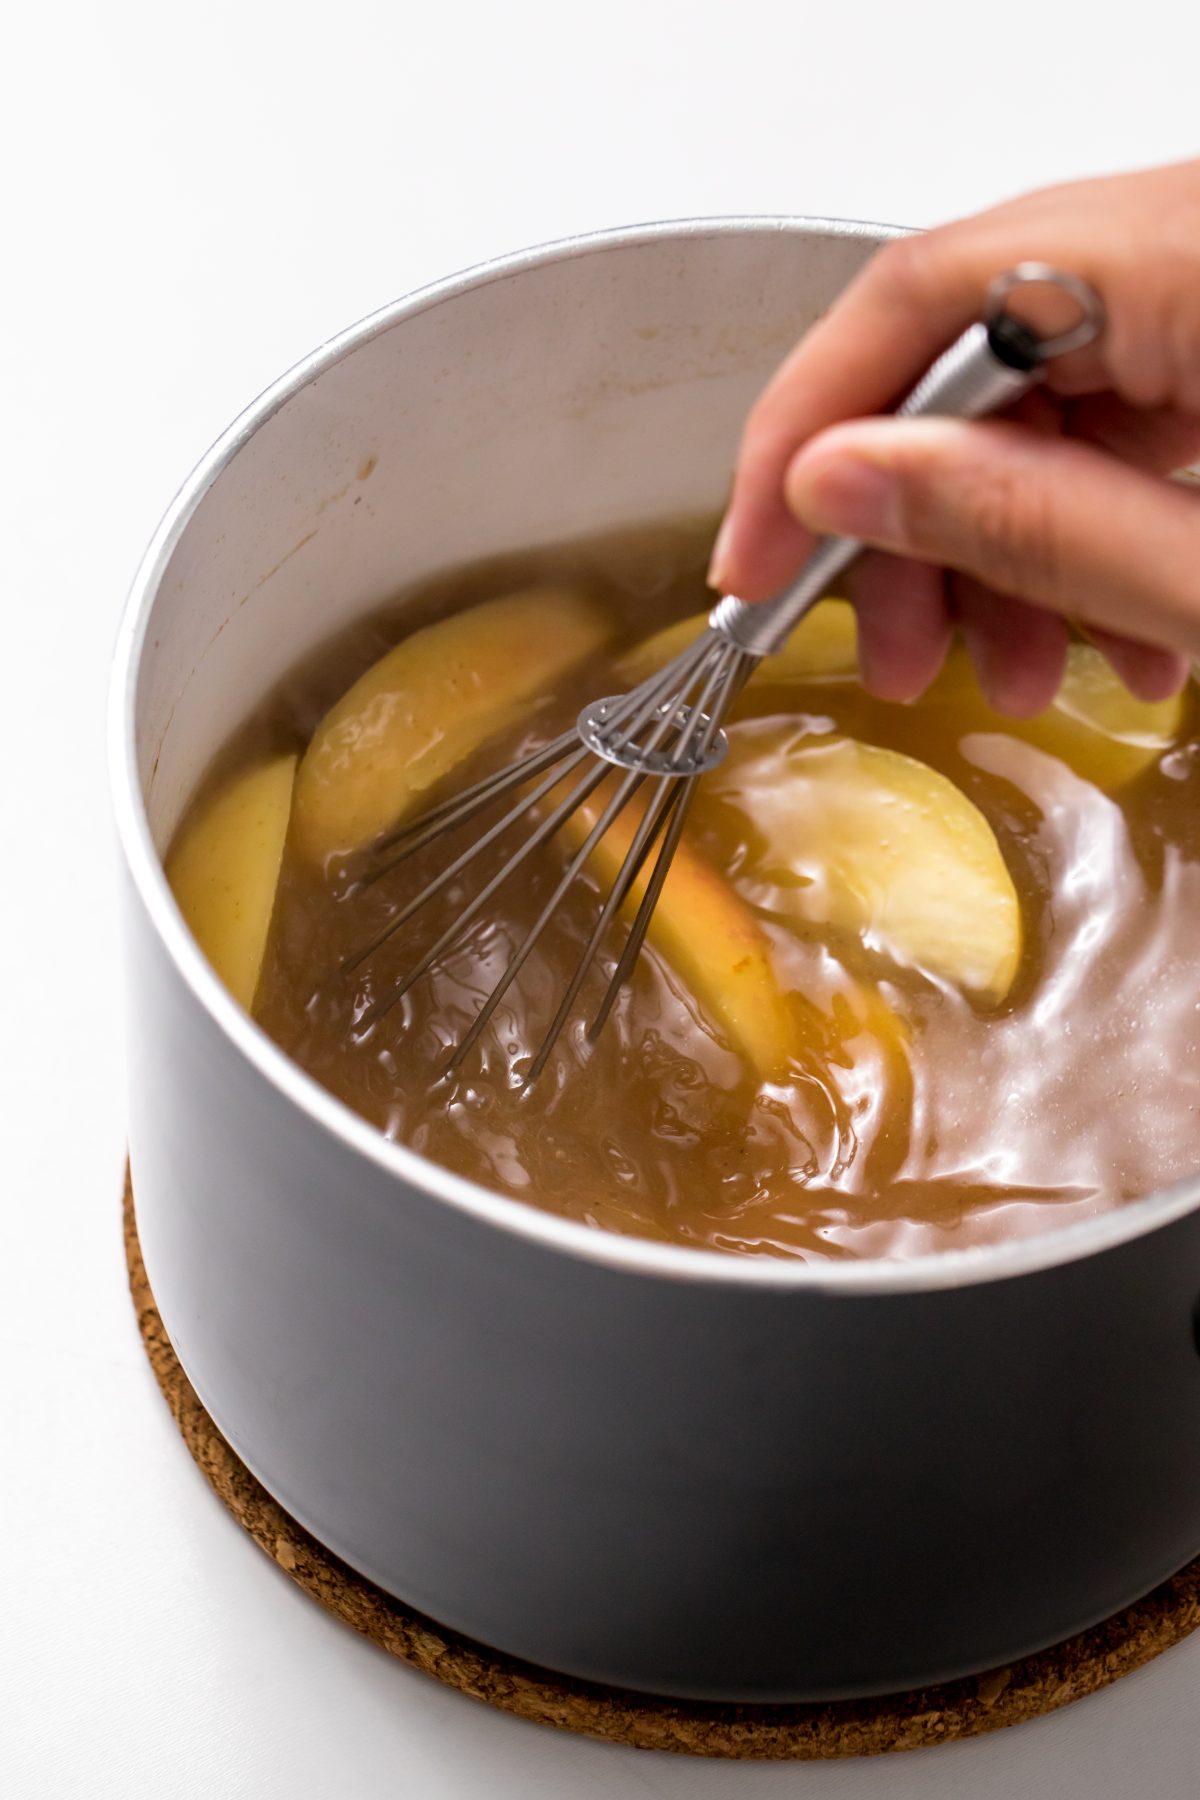 5D4B2542 - Hot Apple Cider with Buttered Rum - Simmer the cider mixture